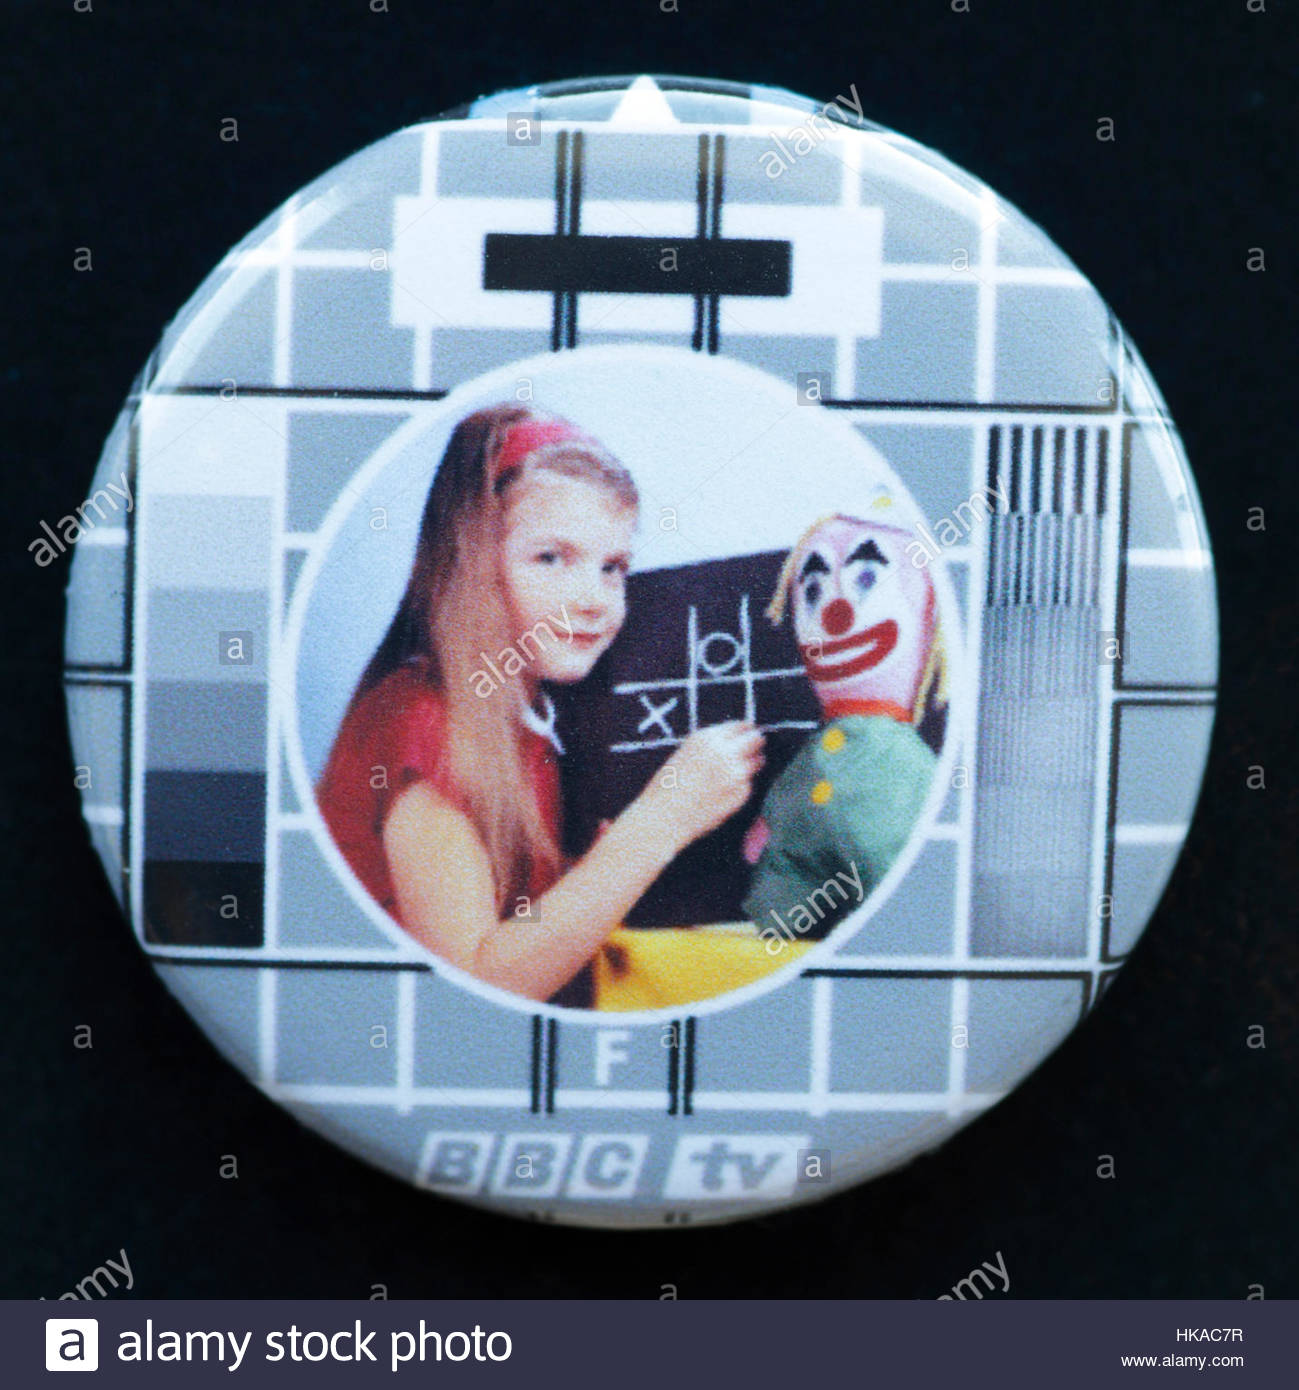 BBC Test Card on a pin badge Stock Photo: 132380187 - Alamy